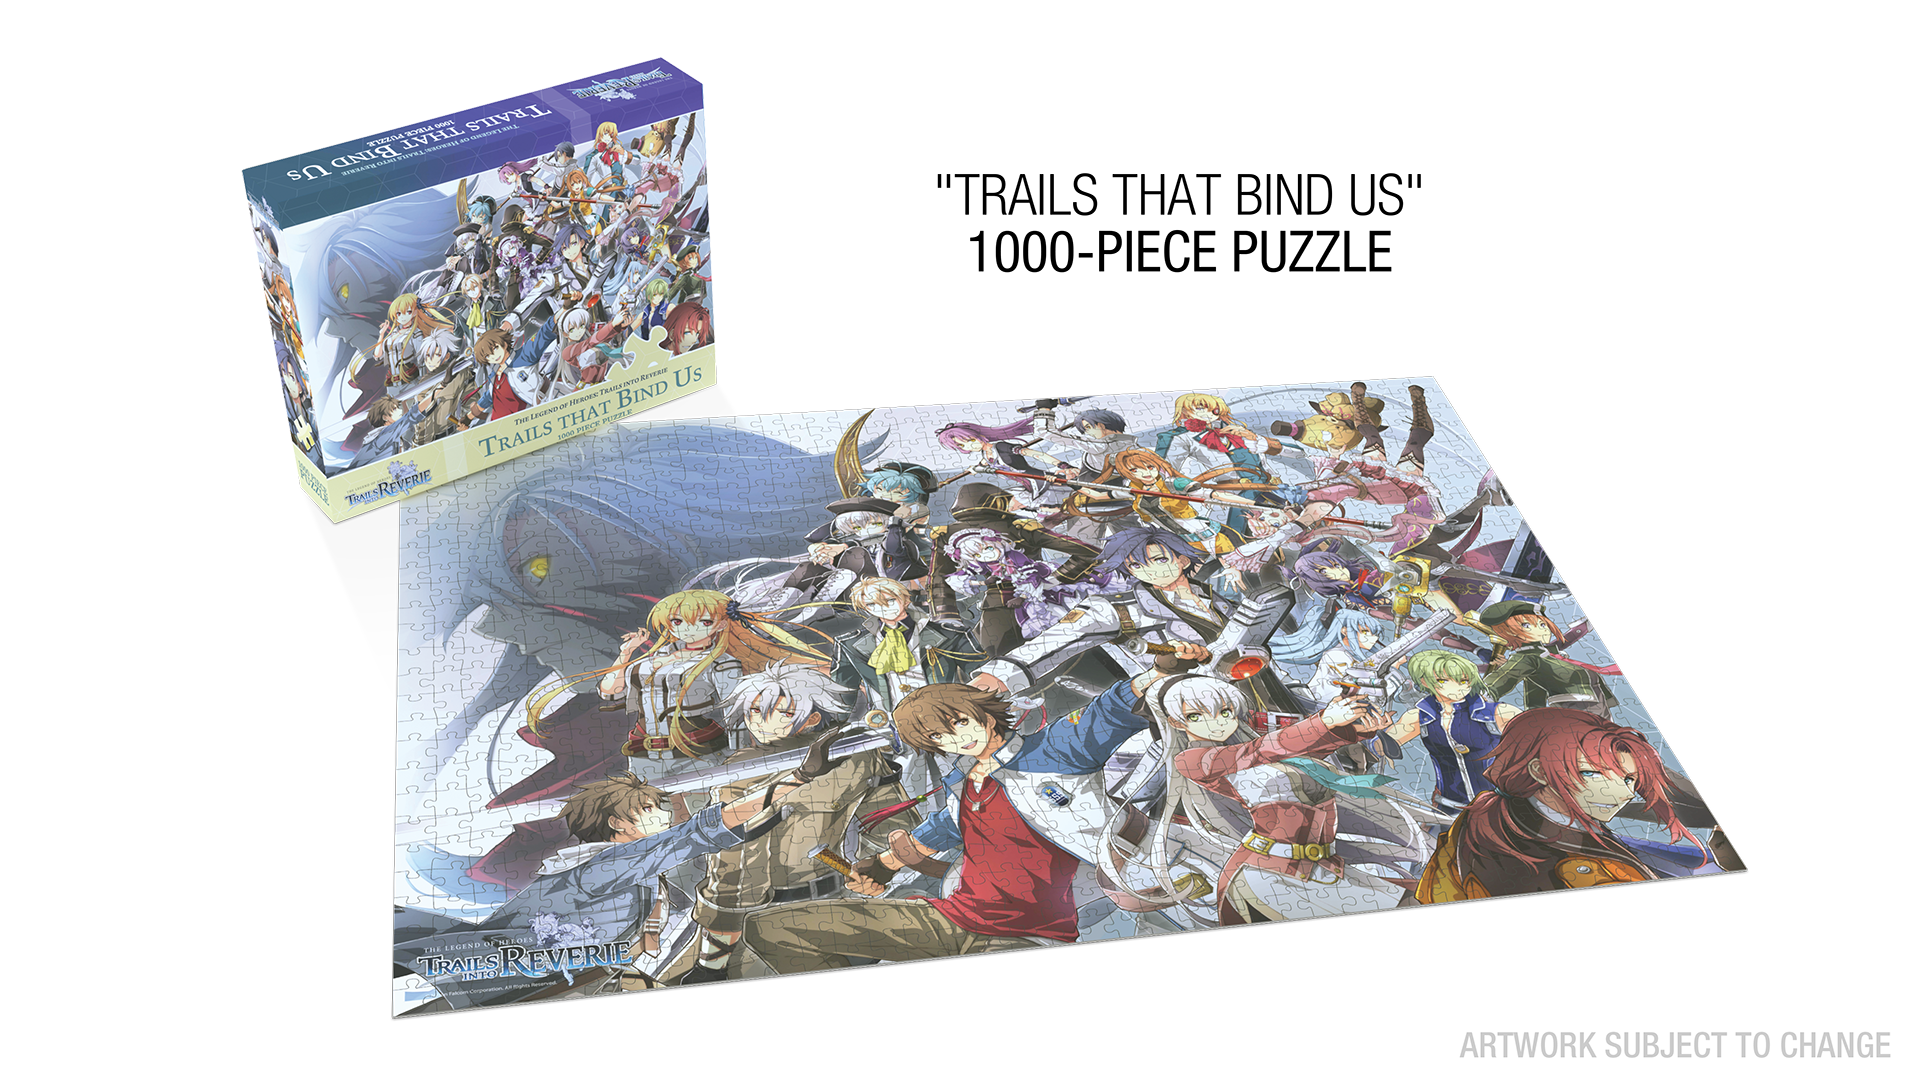 The Legend of Heroes: Trails into Reverie "Trails that Bind Us" 1000-Piece puzzle